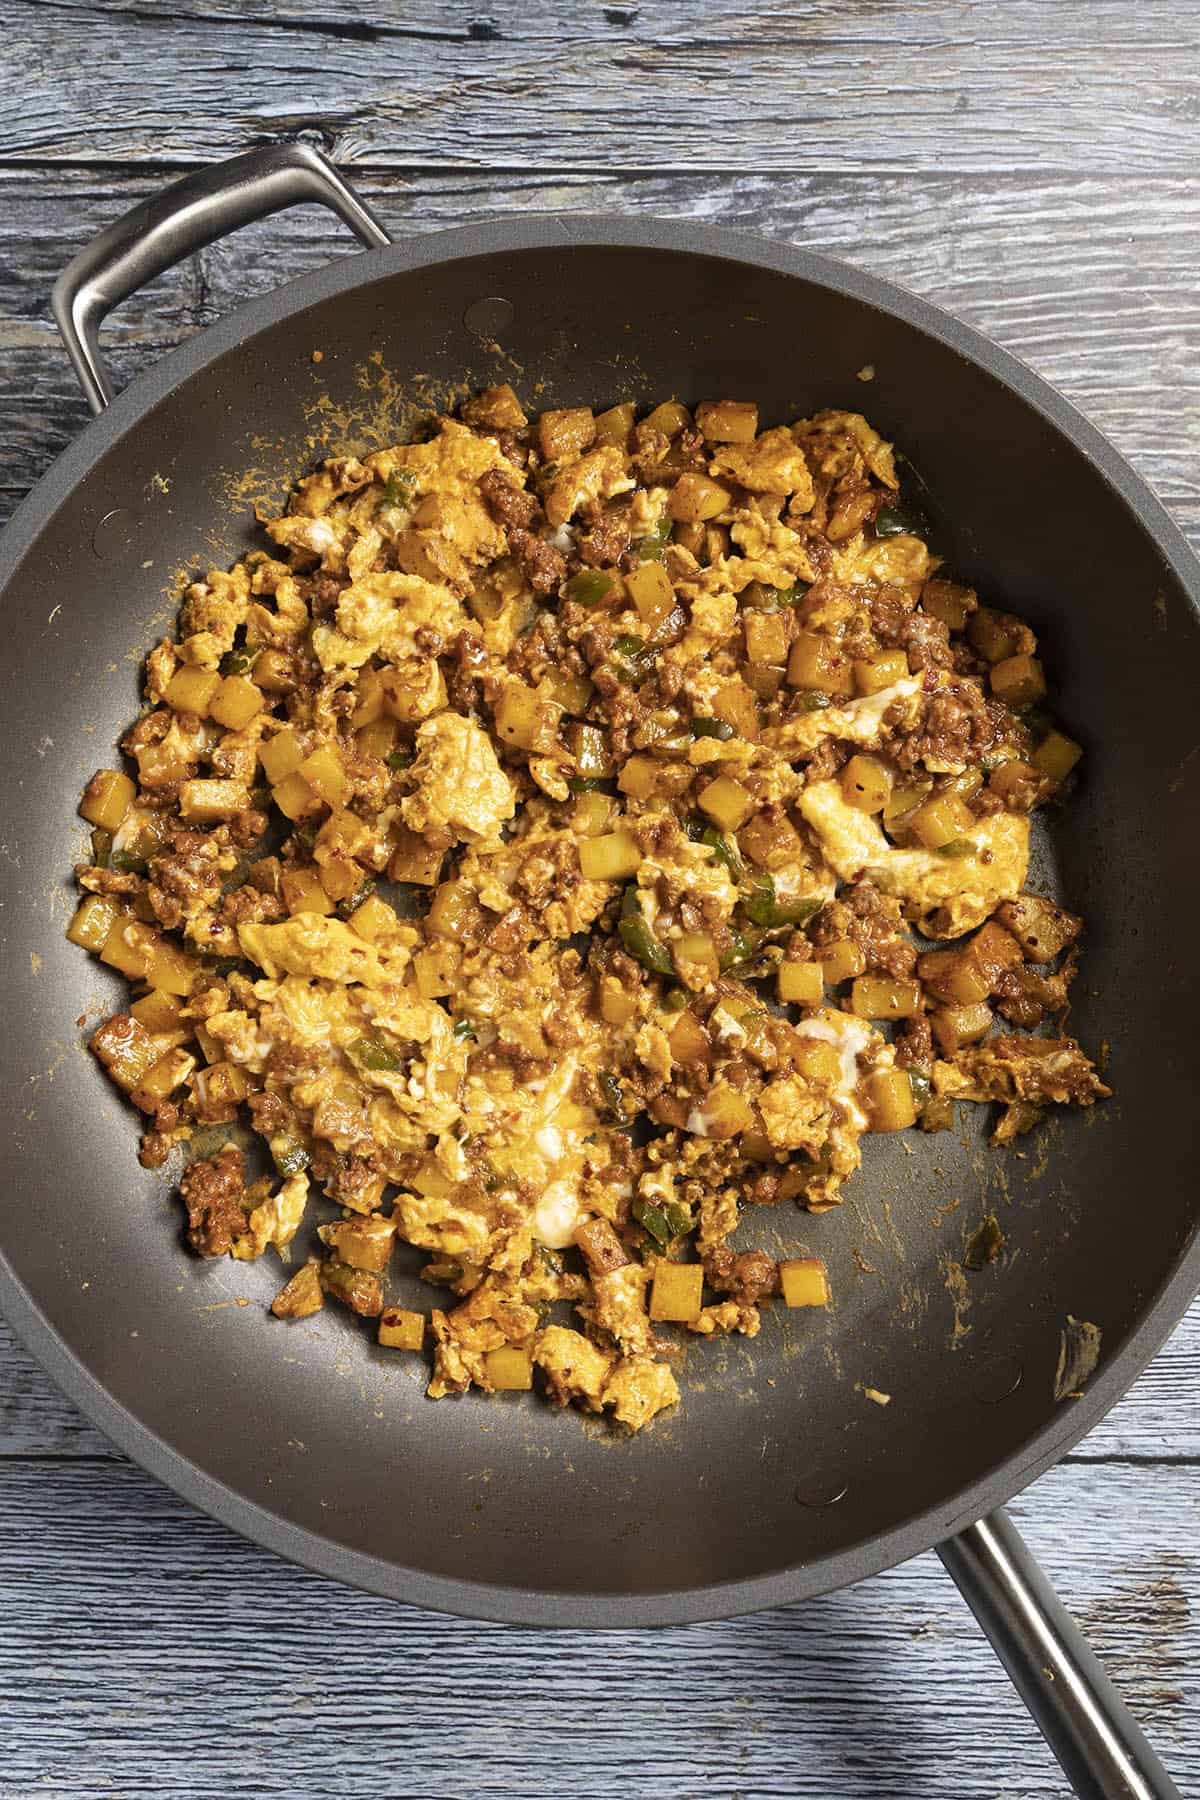 Scrambling the eggs into the pan with potatoes and chorizo